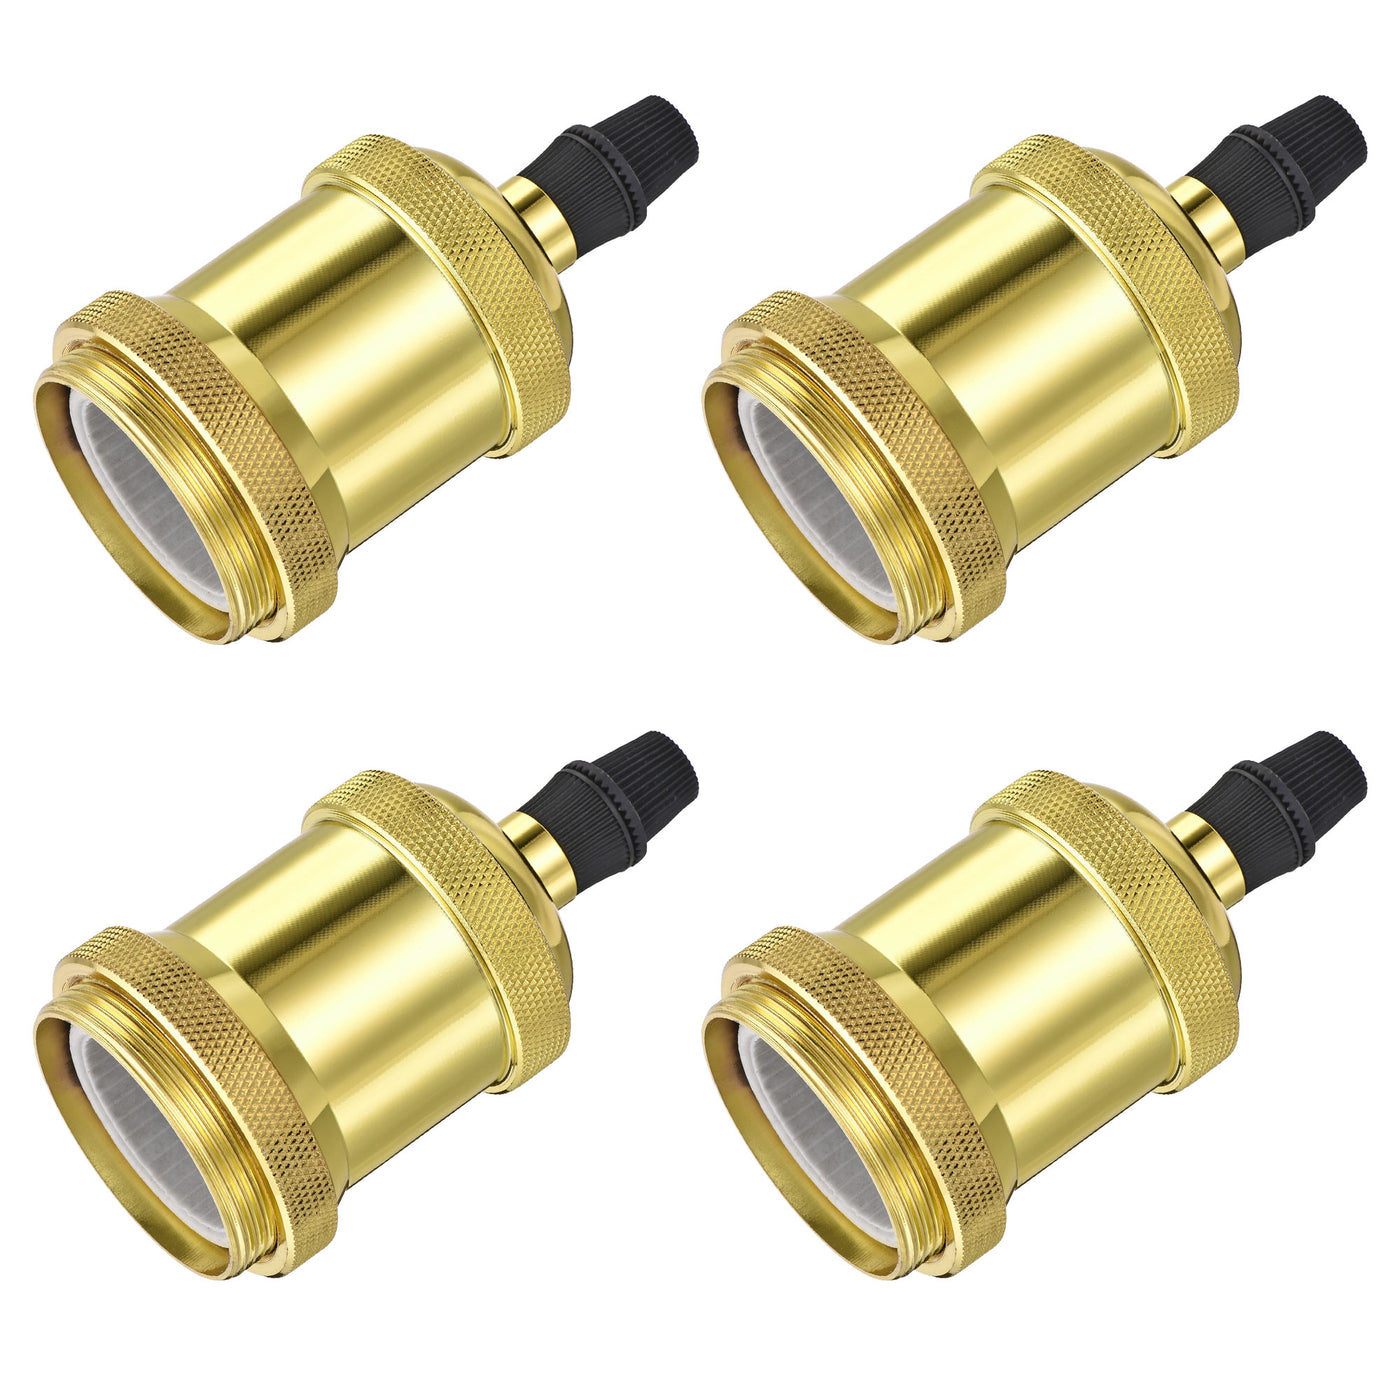 Uxcell Uxcell Bulb Holder, E26/E27 0-250V 3A Threaded Wire Locking Screw Base Lamp Socket, Gold Bronze Pack of 4